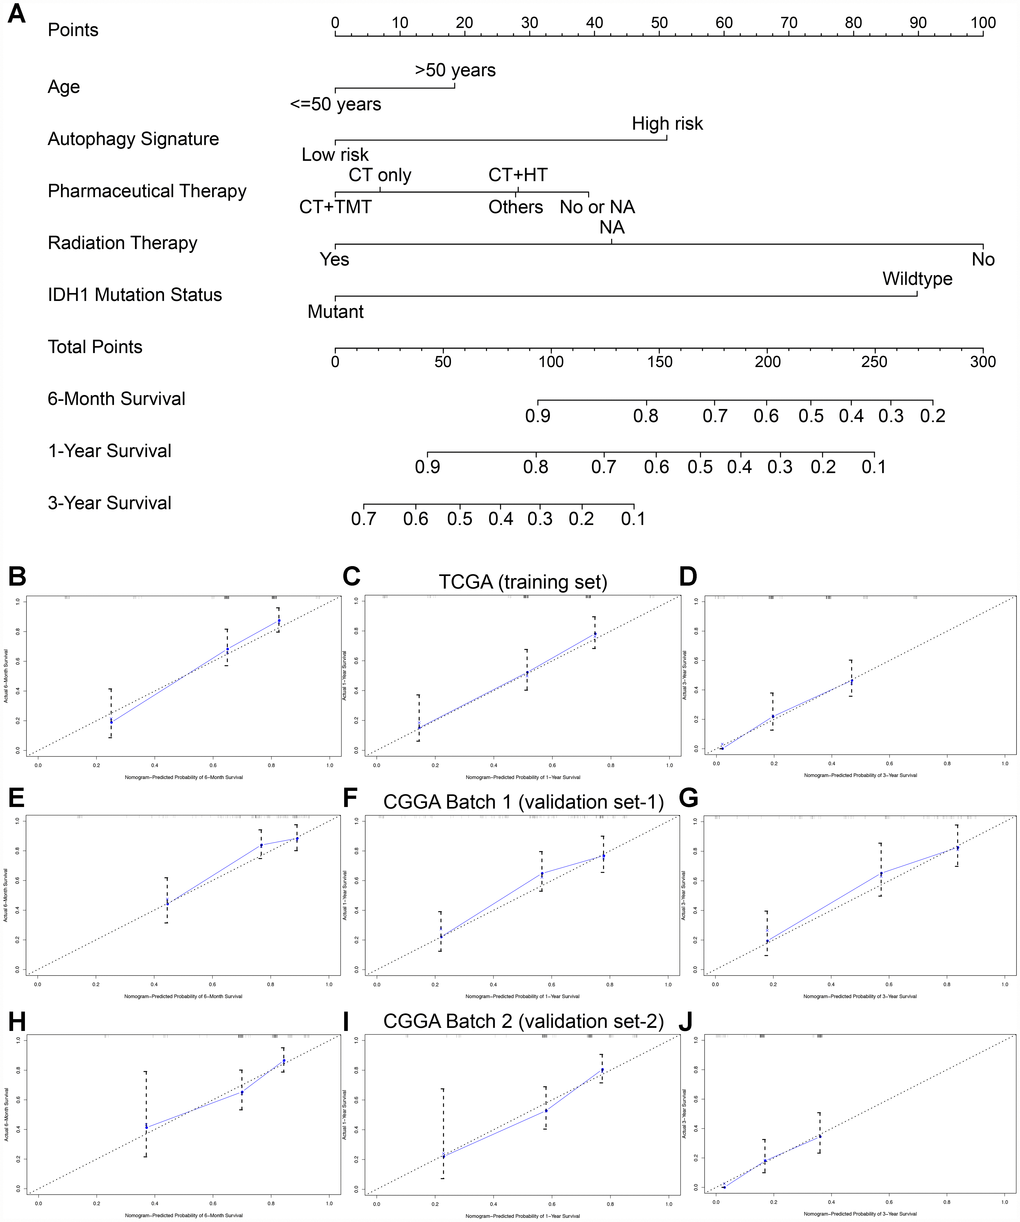 Nomogram to predict the 0.5-, 1-, and 3-year survival probability of patients with GBM. (A) Prognostic nomogram to predict the survival of GBM patients based on the TCGA training set. Calibration curves of the nomogram for predicting survival at 0.5, 1, and 3 years in the TCGA training cohort (B–D), CGGA Batch-1 validation cohort (E–G), and CGGA Batch-2 validation cohort (H–J). The actual survival is plotted on the y-axis; the nomogram-predicted probability is plotted on the x-axis.